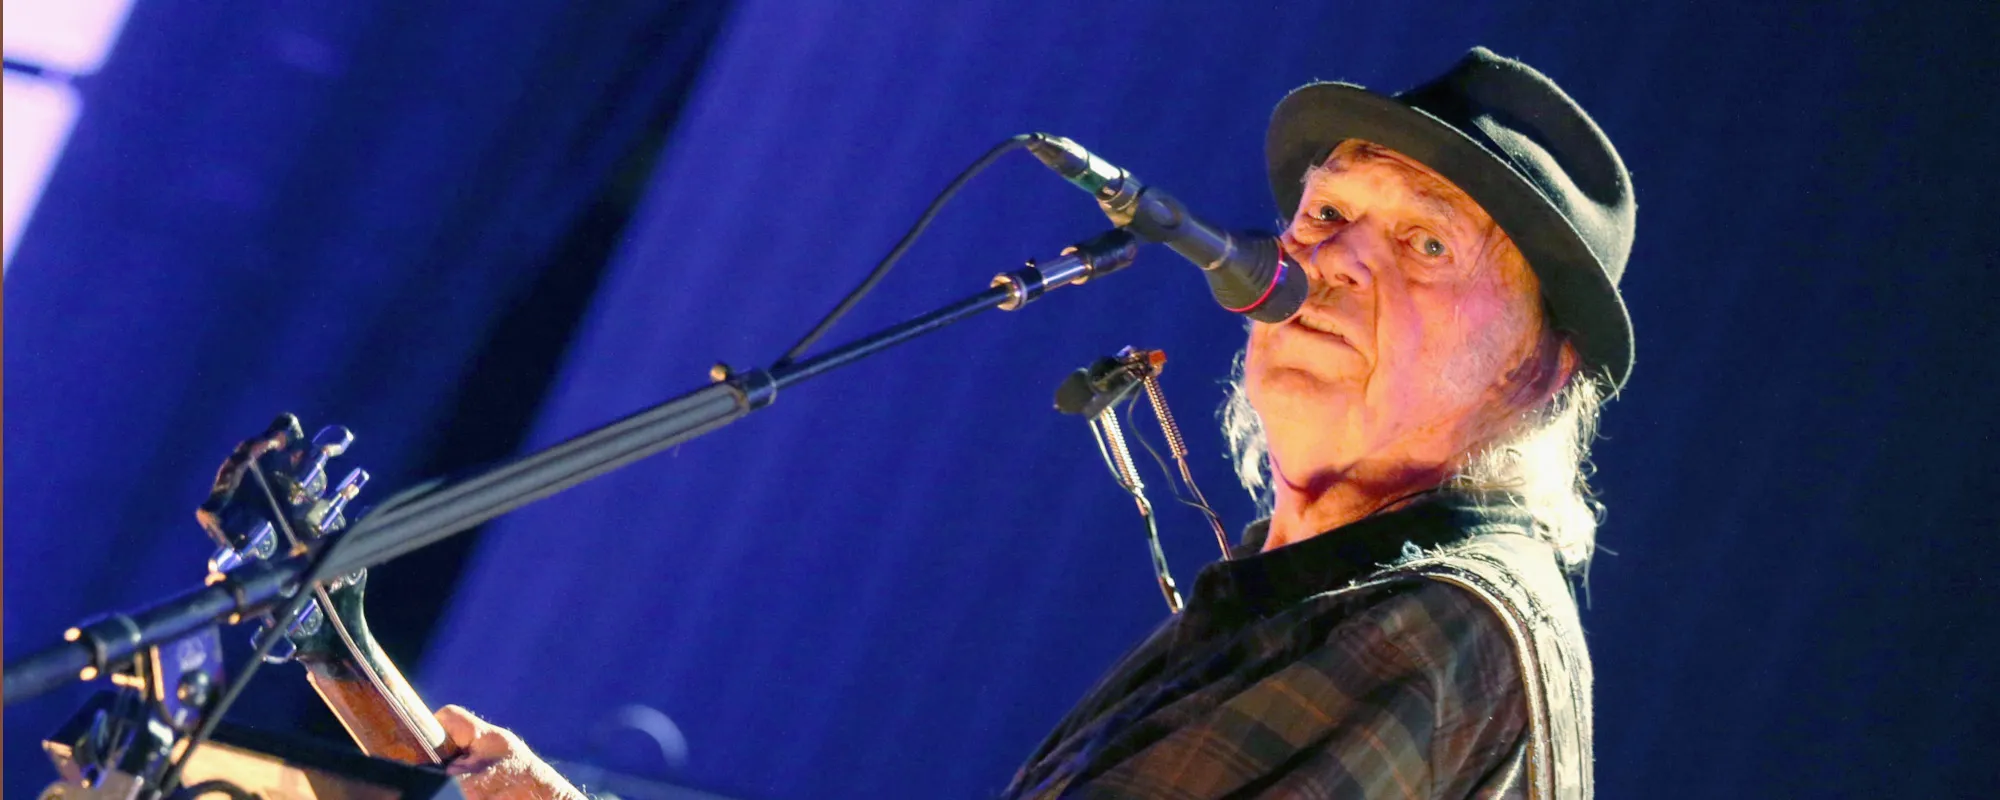 Neil Young and Crazy Horse Reveal New Album ‘All Roads Lead Home’